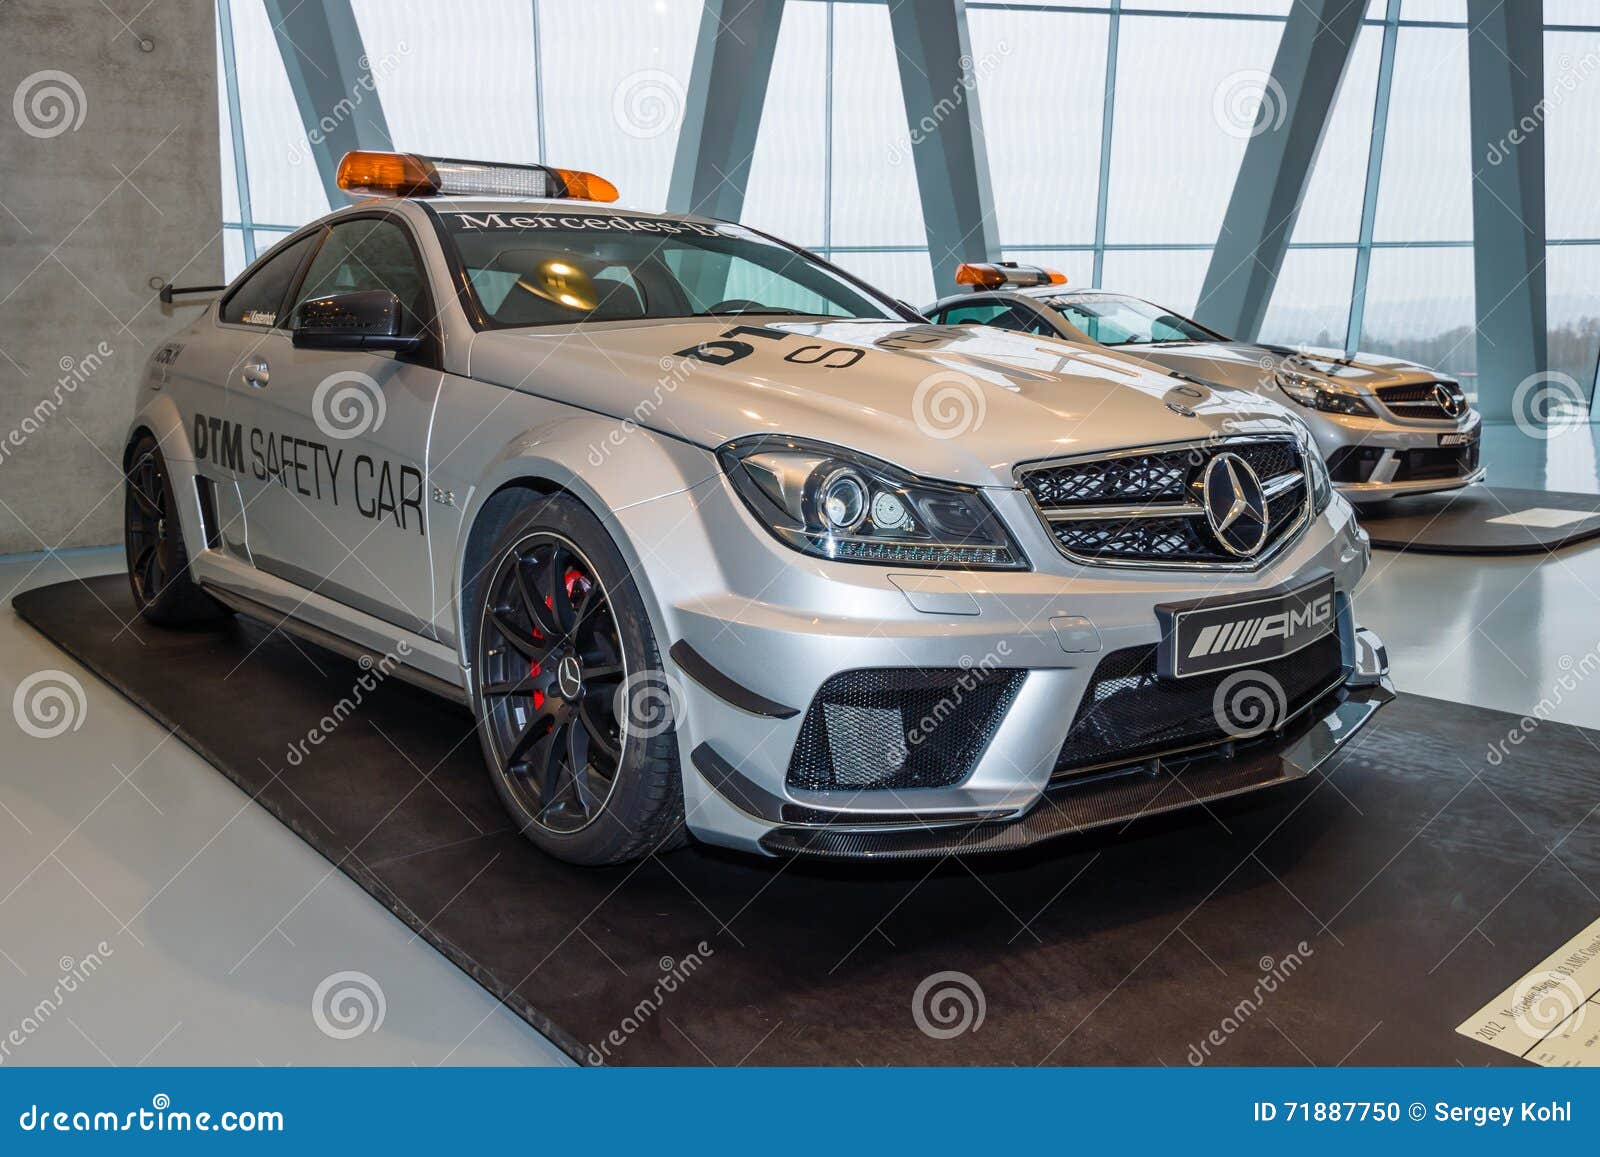 Official Dtm Safery Car Mercedes Benz C63 Amg Coupe 12 Editorial Image Image Of Transport Auto